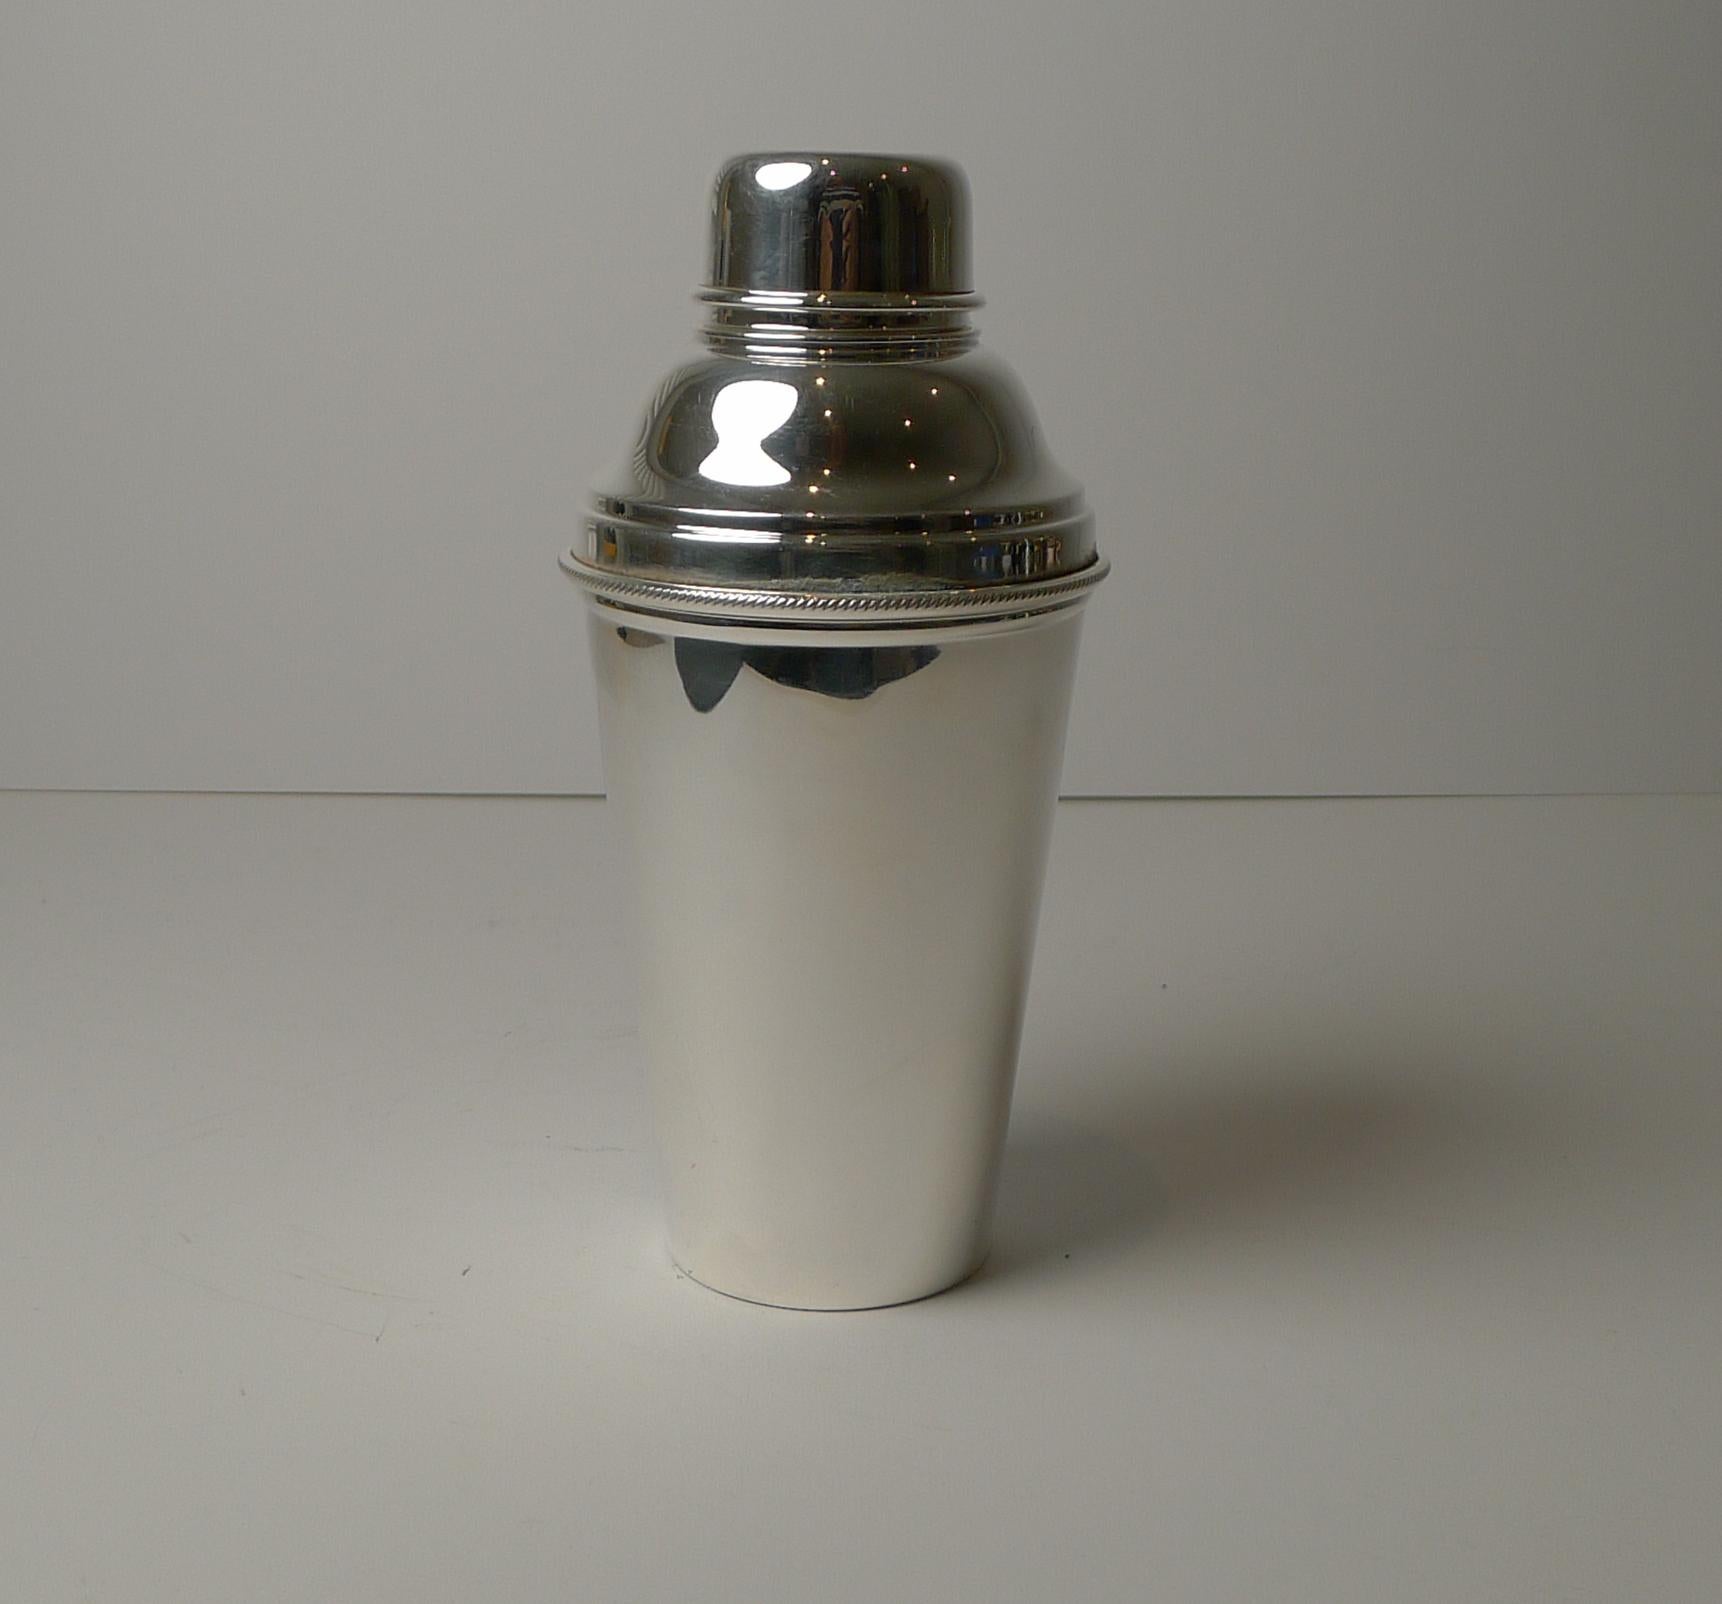 Always highly sought-after and hard to find, this vintage Art Deco cocktail shaker has an integral Lemon squeezer or reamer built into the top section of the shaker.

Made from English silver plate, it is fully marked on the underside for the